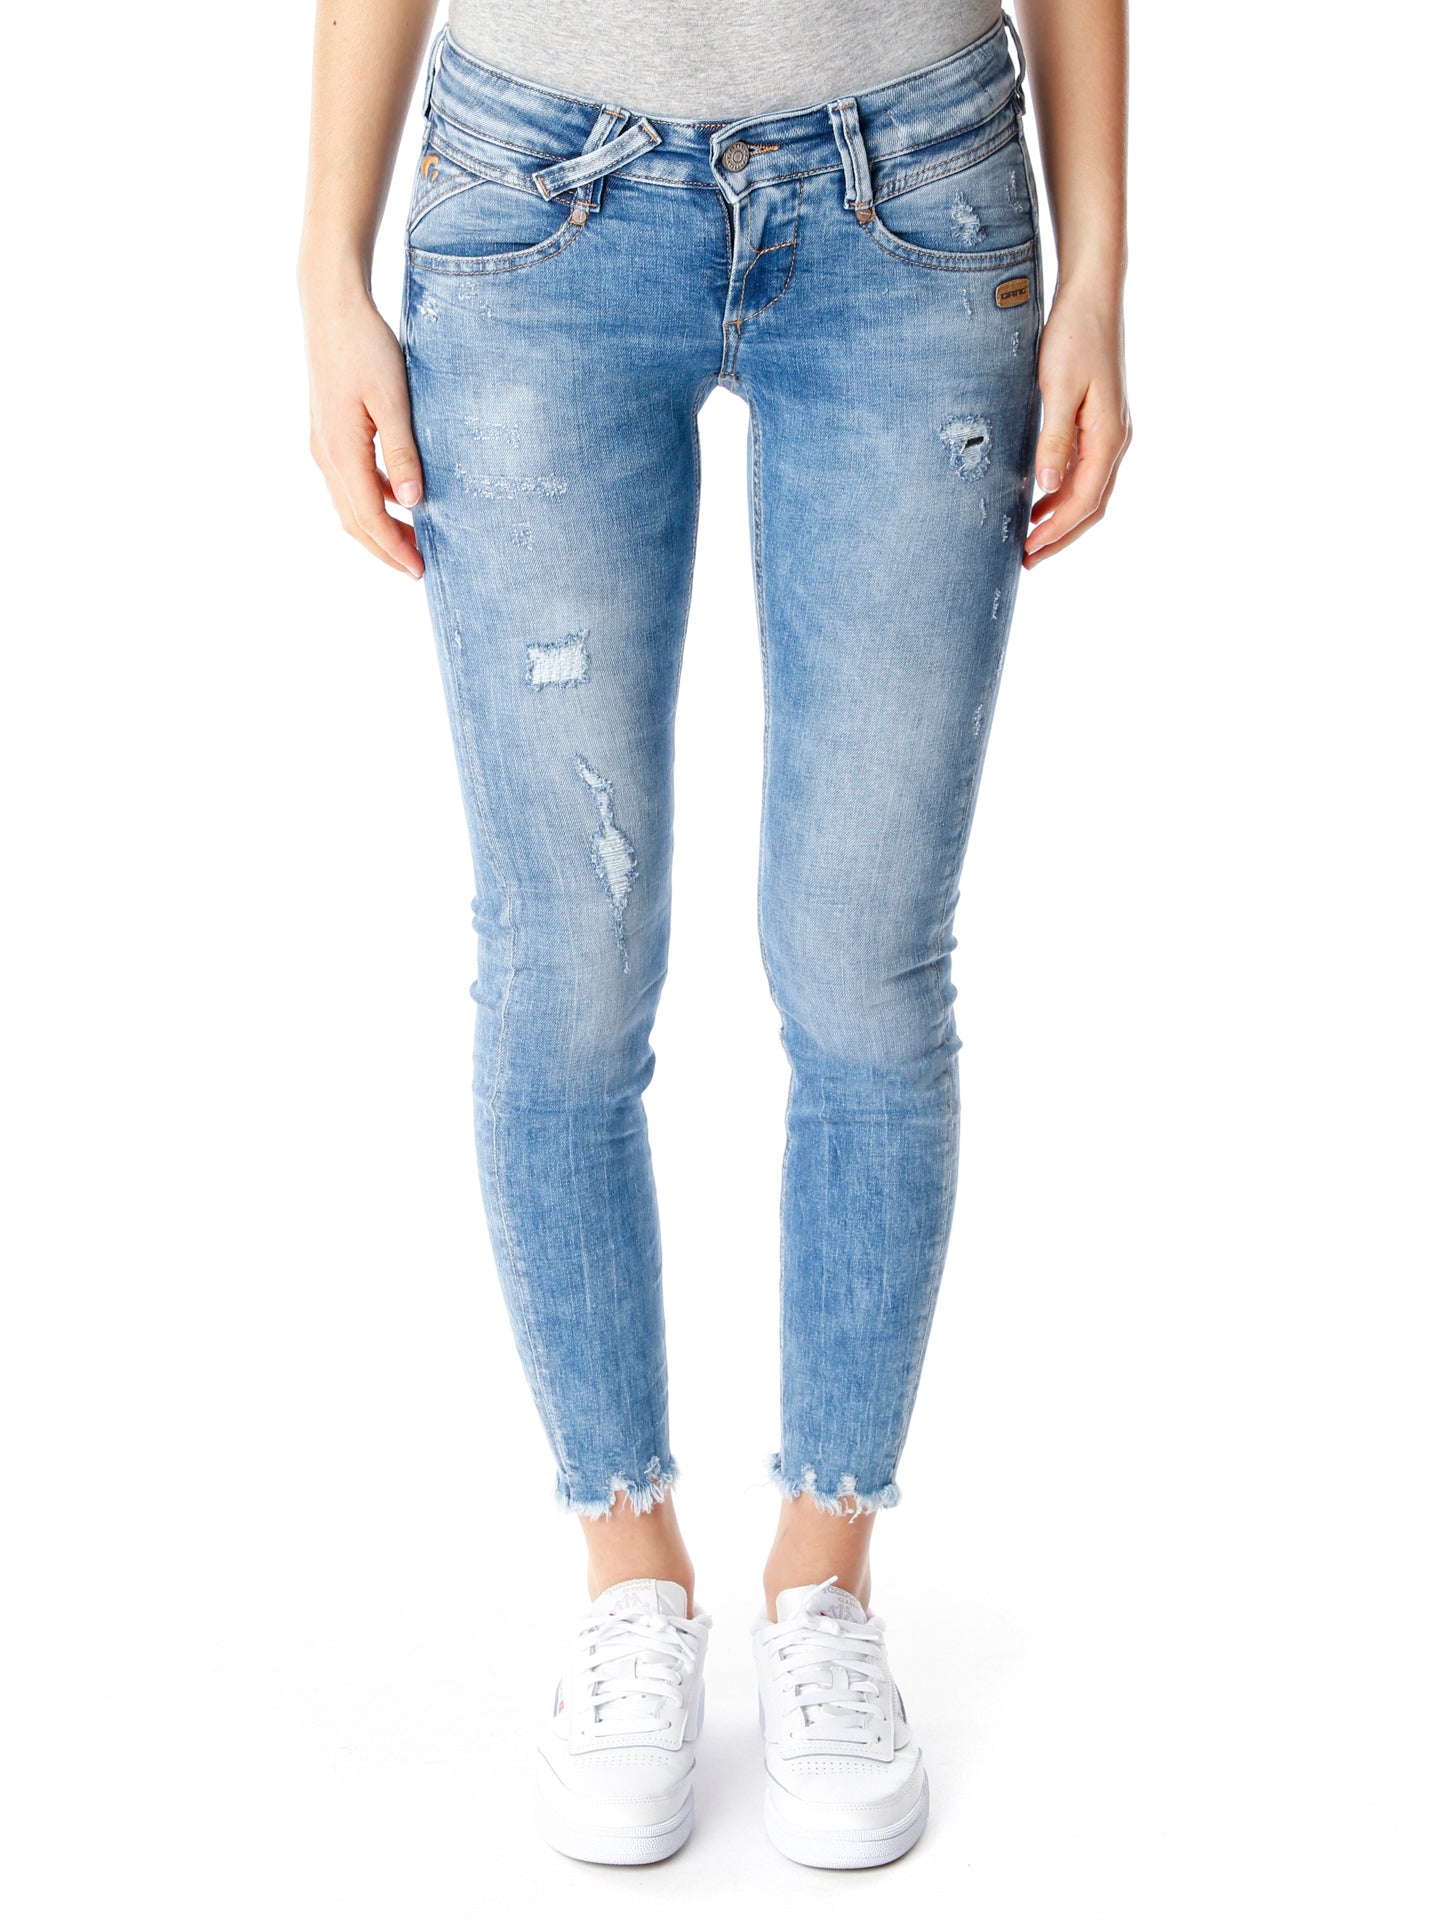 Skinny Low Waist Nena Jeans Gang Fit Cropped